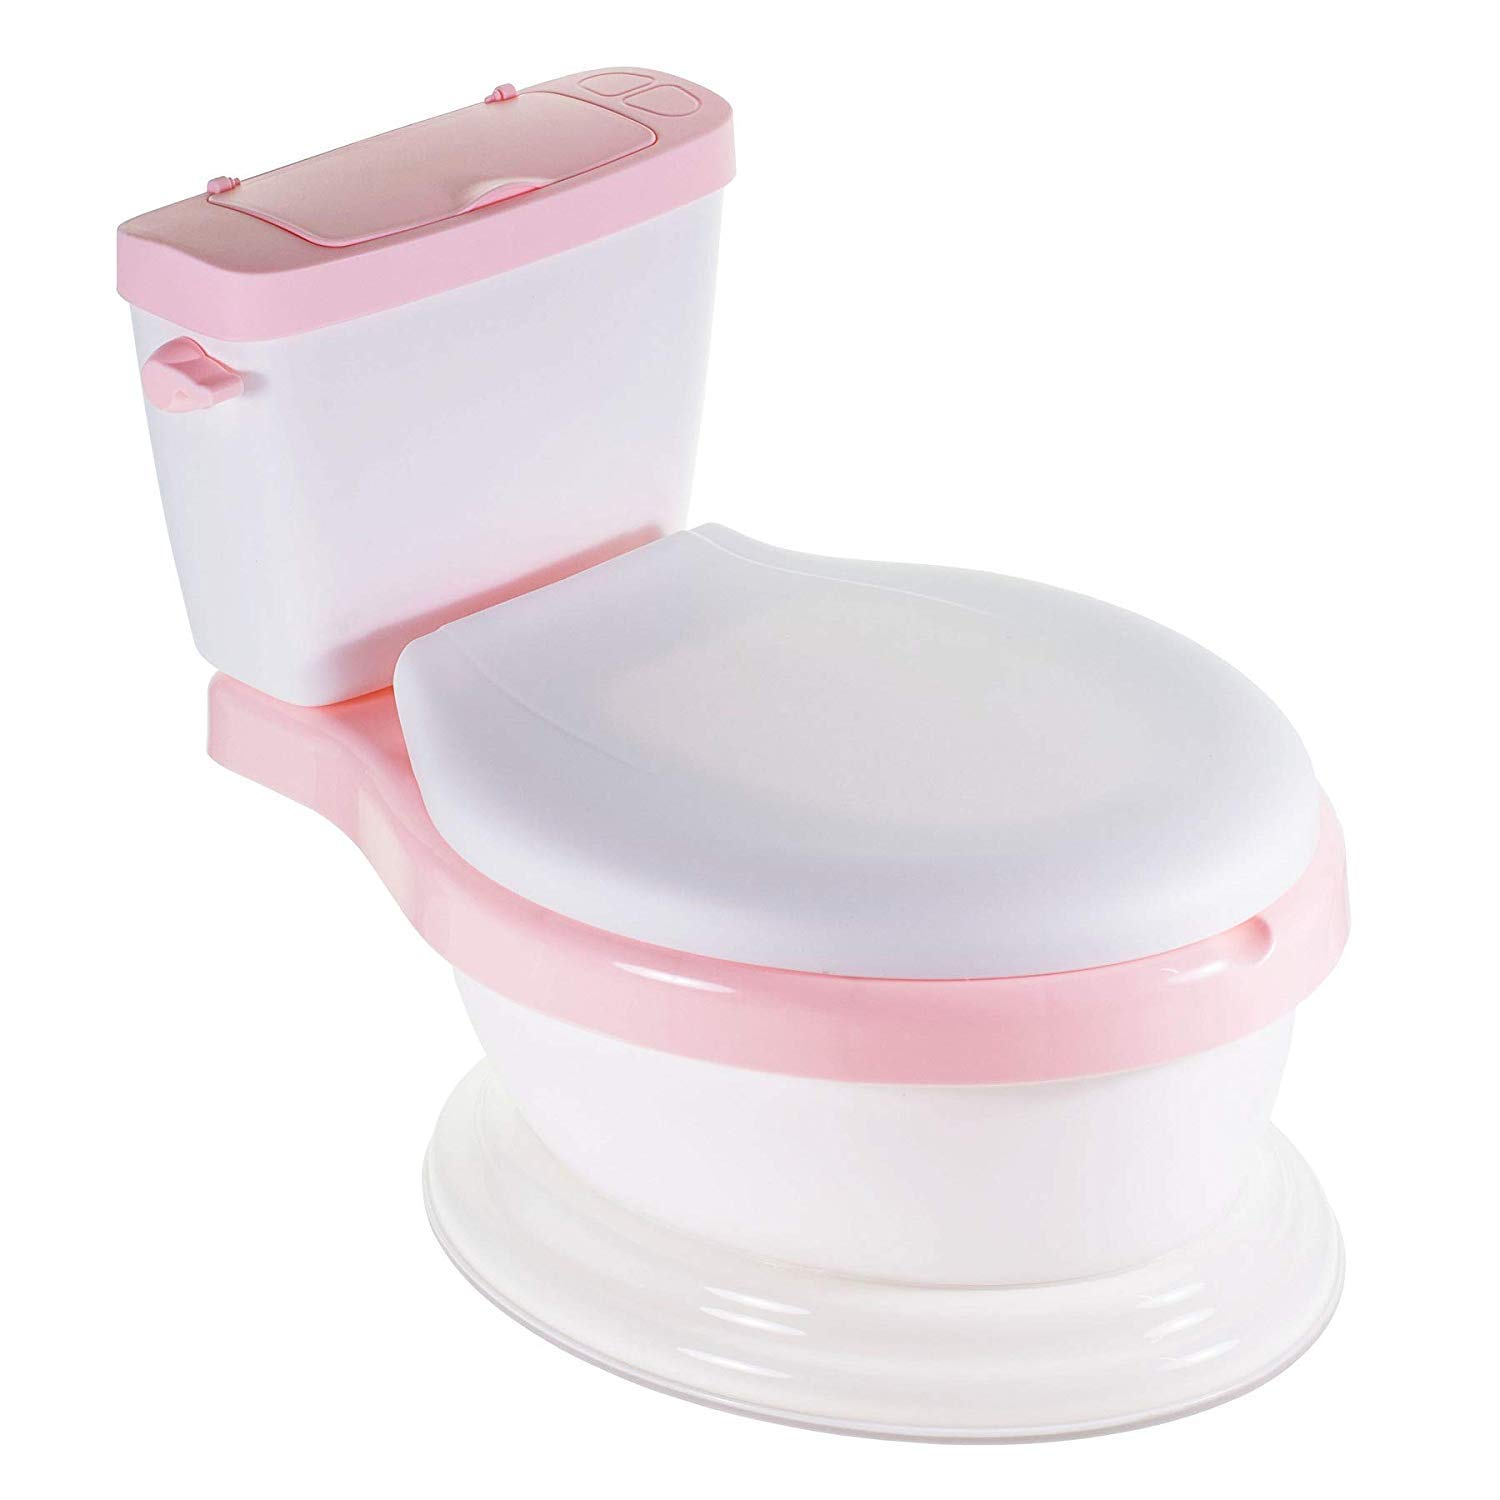 western toilet for baby Western toilet seat